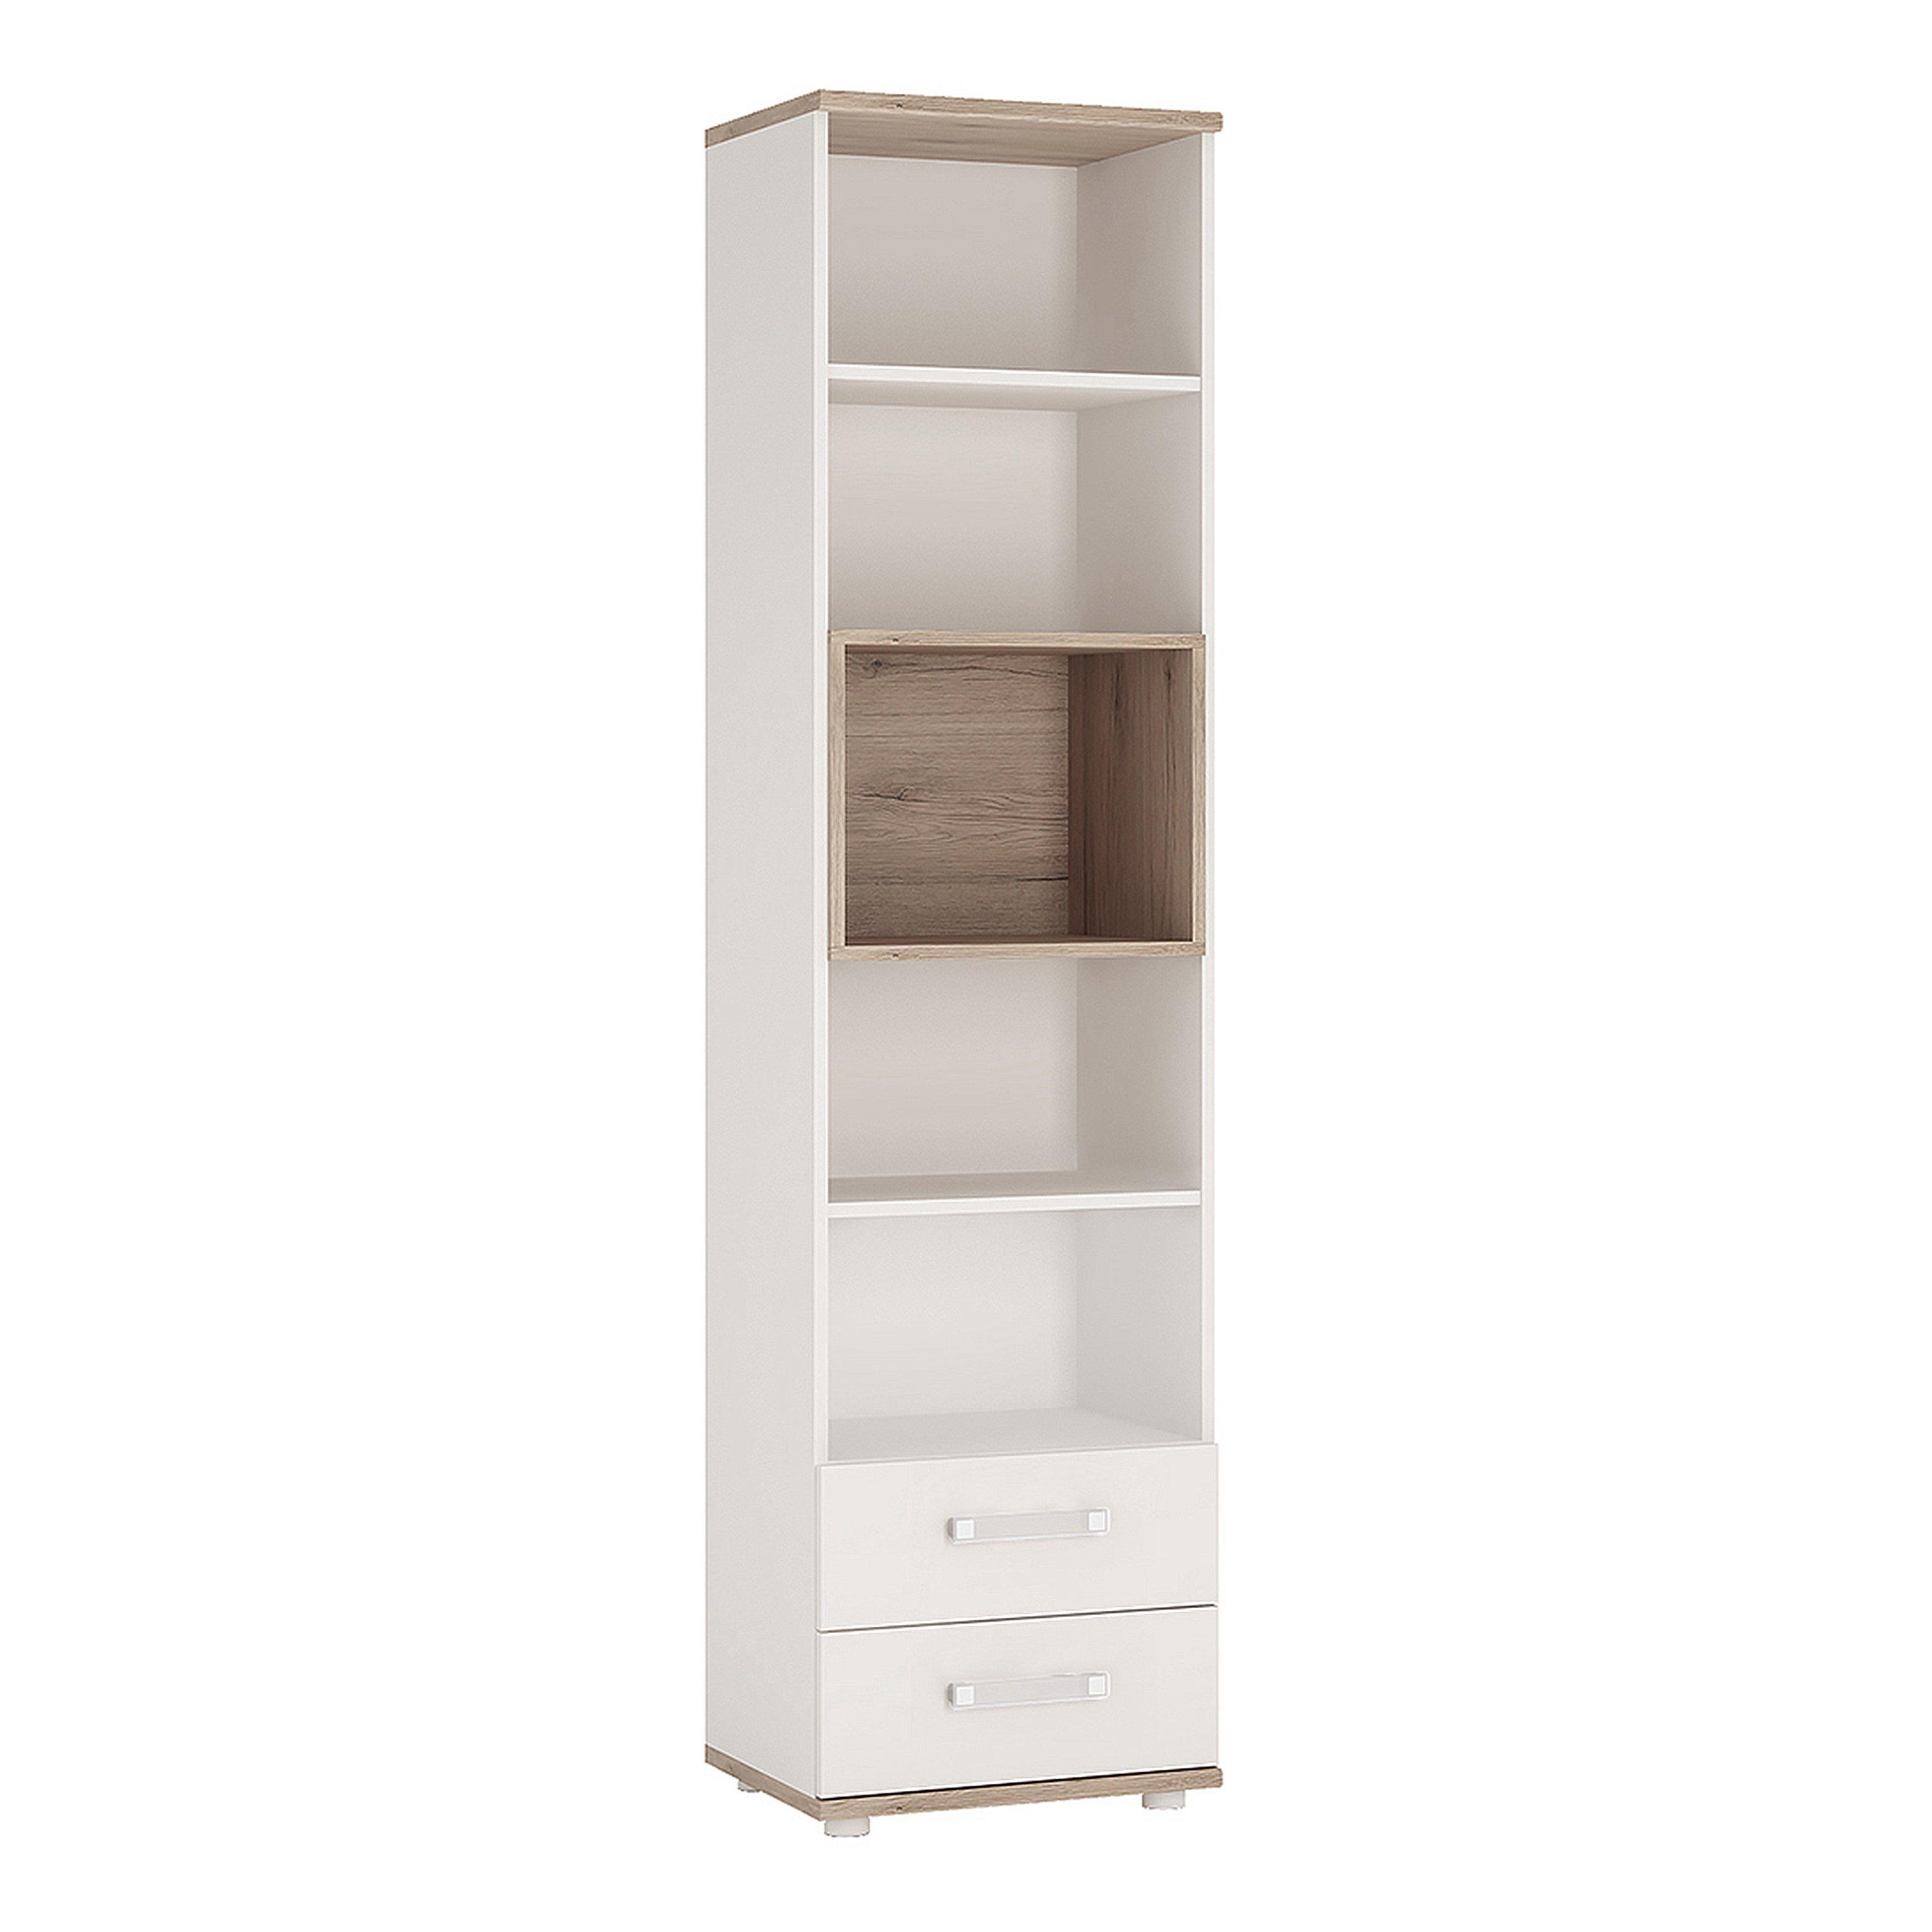 4KIDS Tall 2 Drawer Bookcase